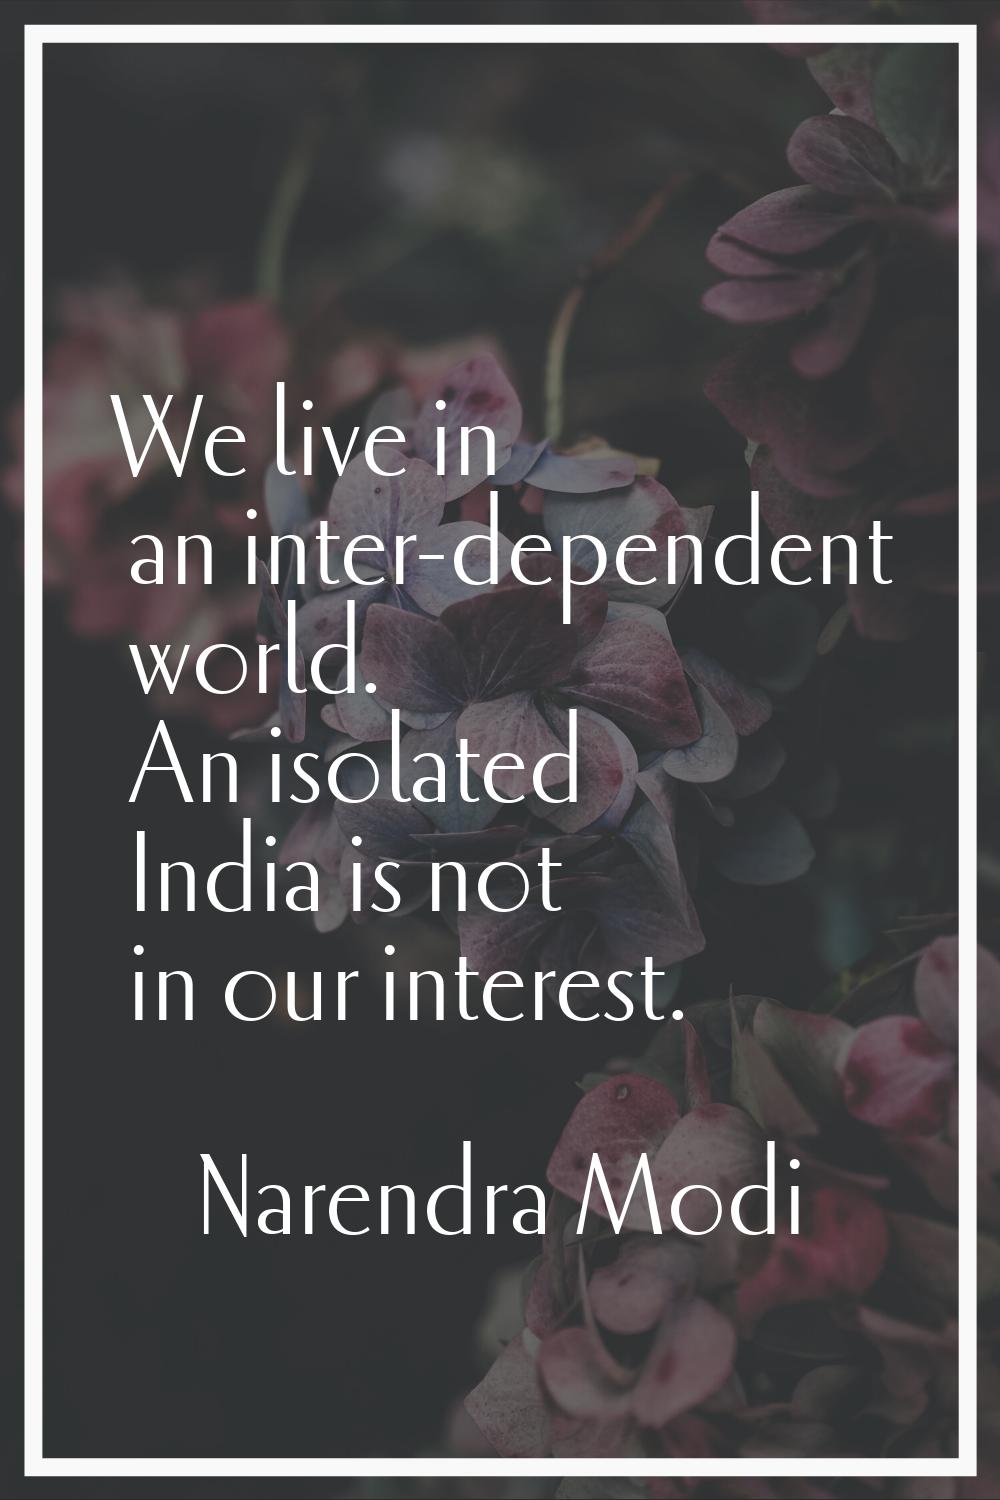 We live in an inter-dependent world. An isolated India is not in our interest.